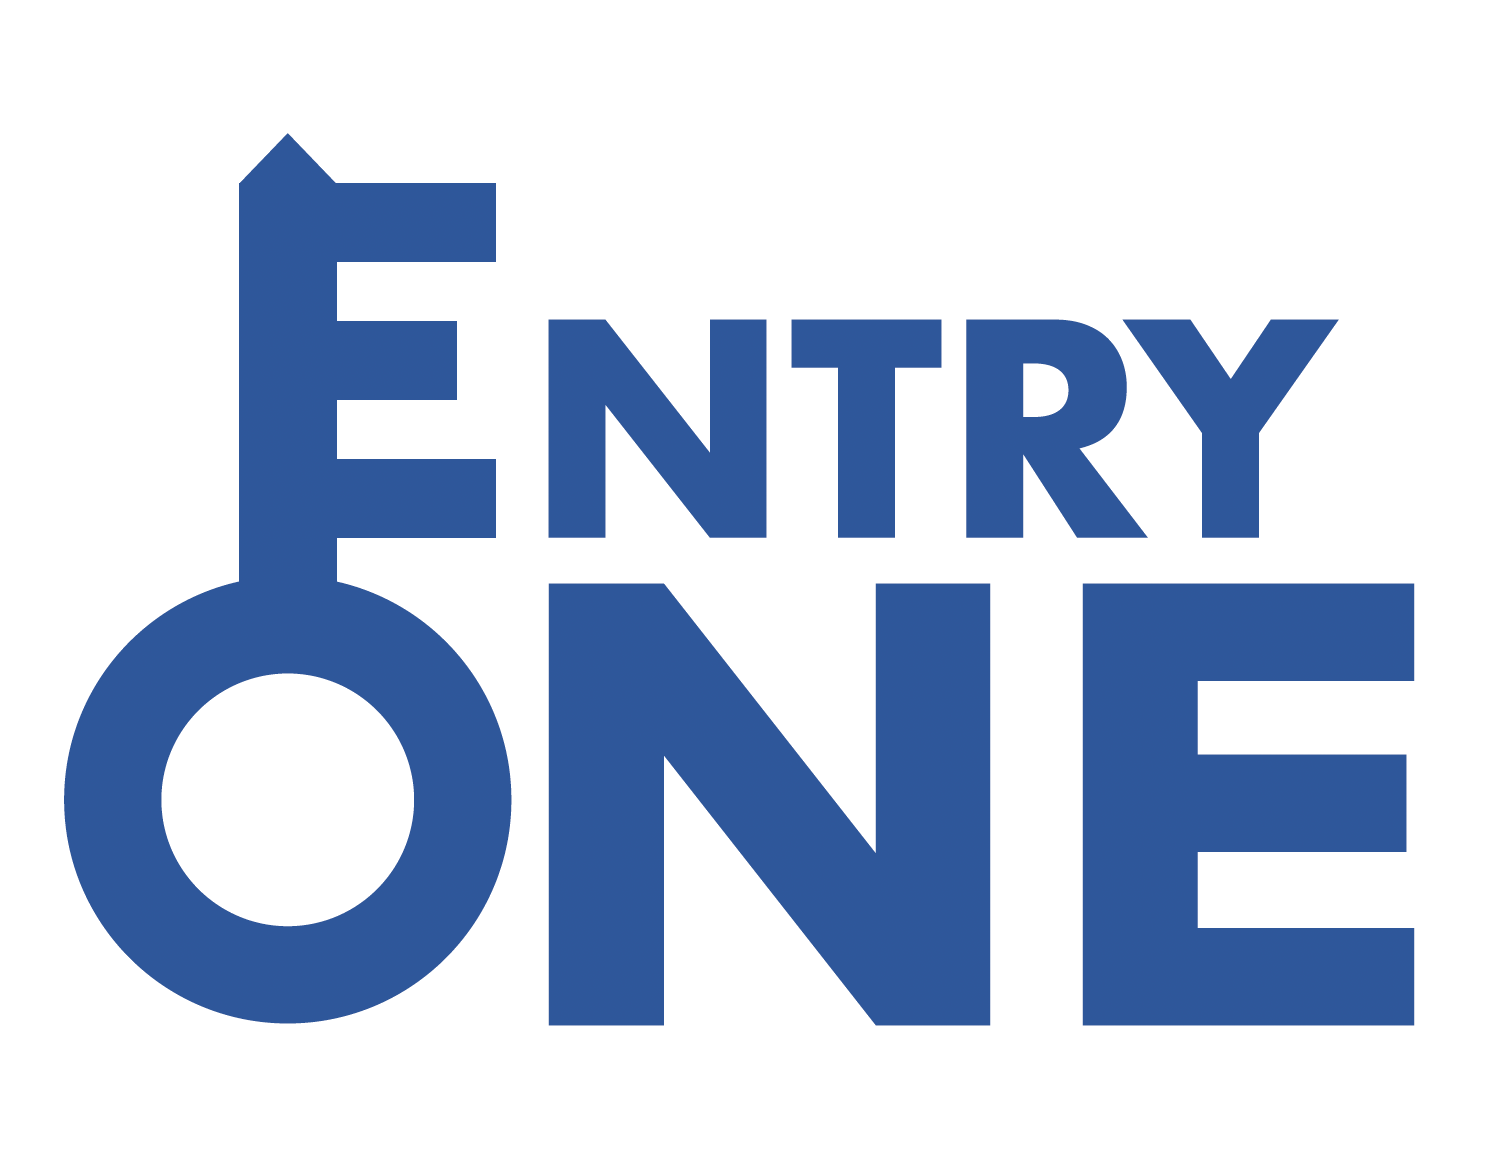  EntryOne (also known as BlueToothKey)